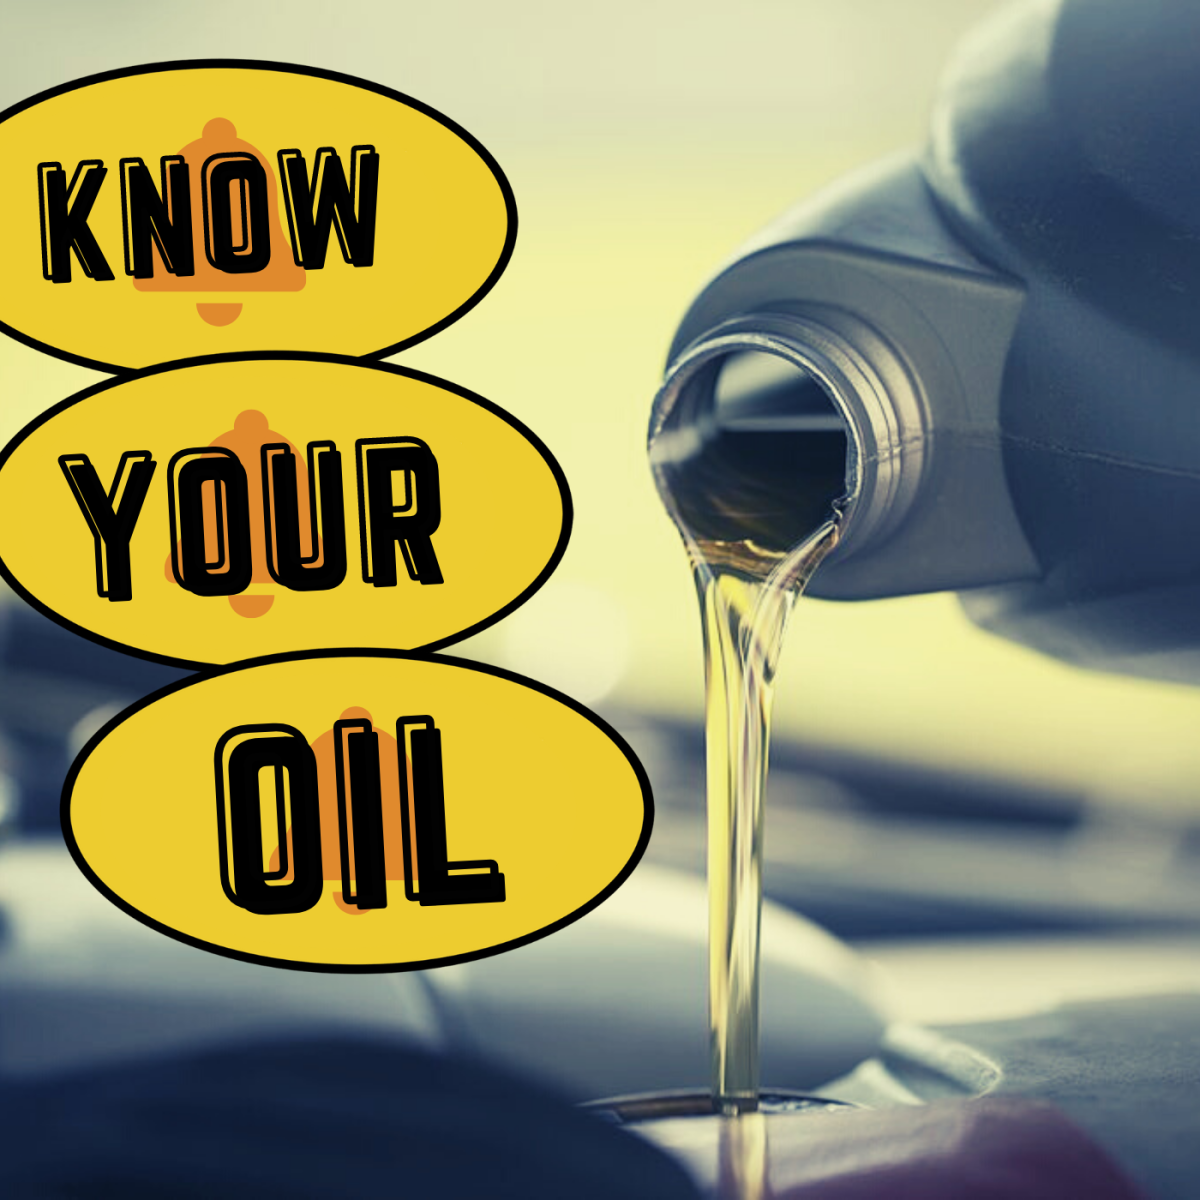 Become familiar with engine oil differences.